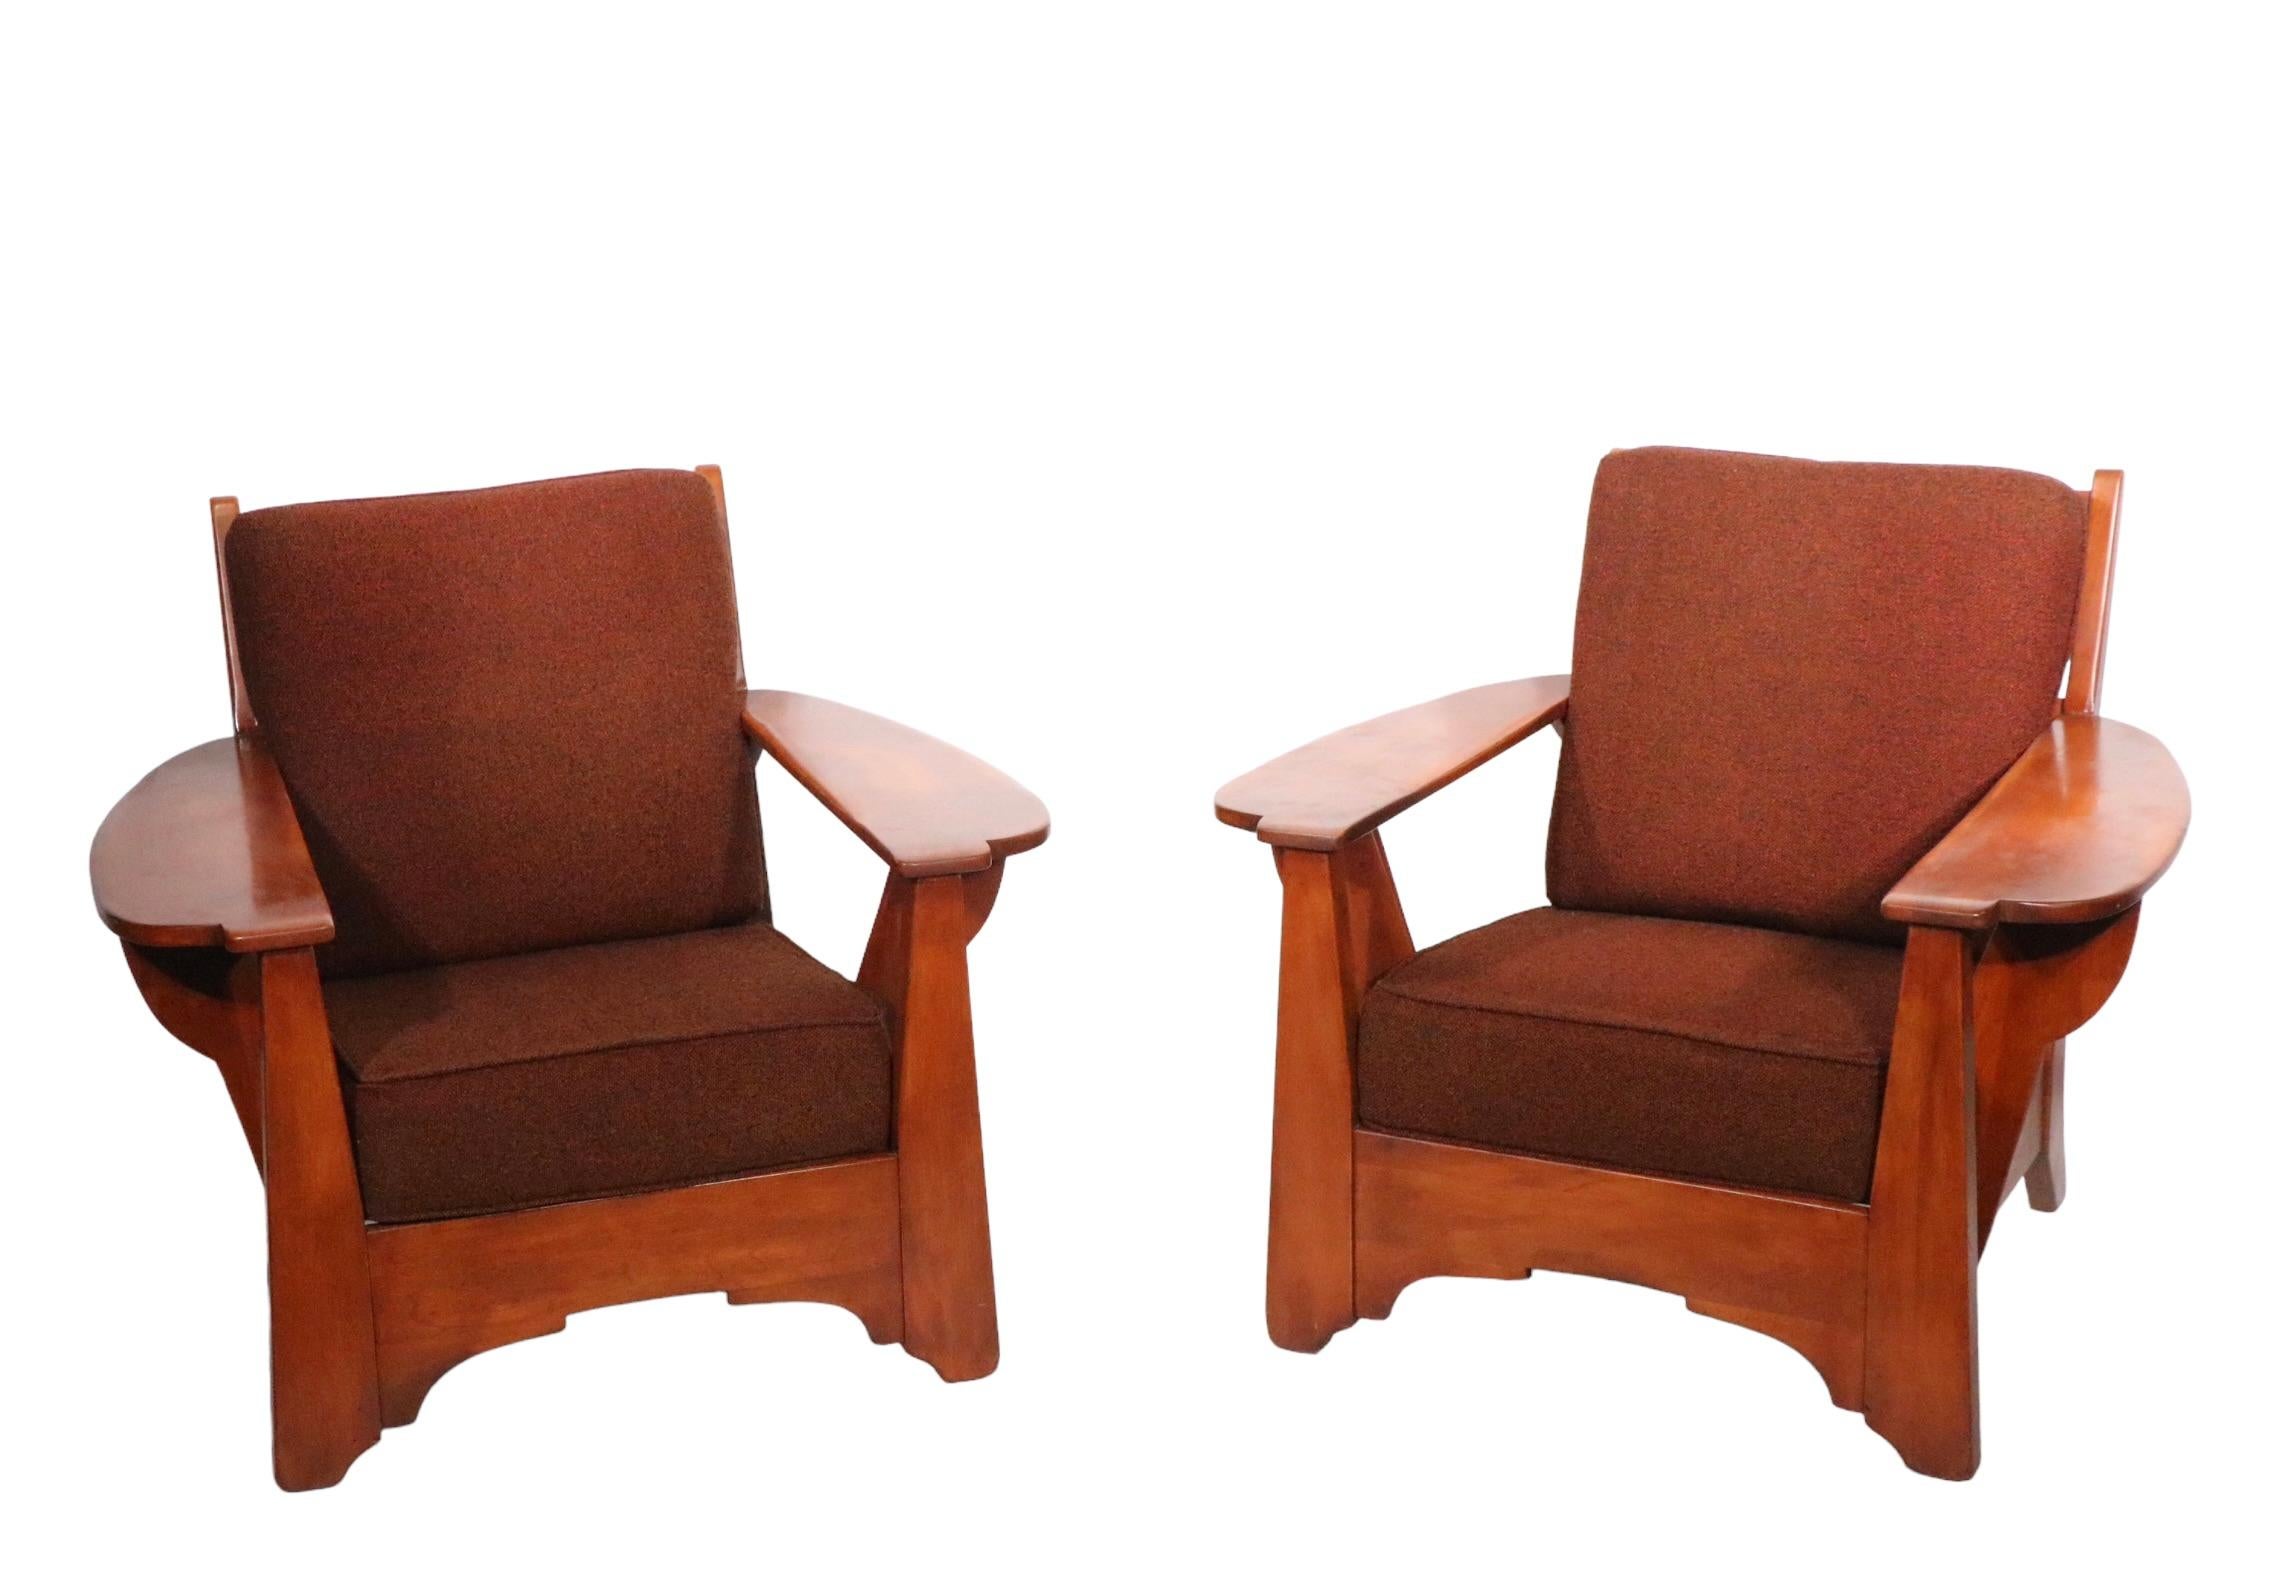 Pr. Paddle Arm Lounge Chairs by Herman de Vries for Cushman Colonial, c 1940-50s 2